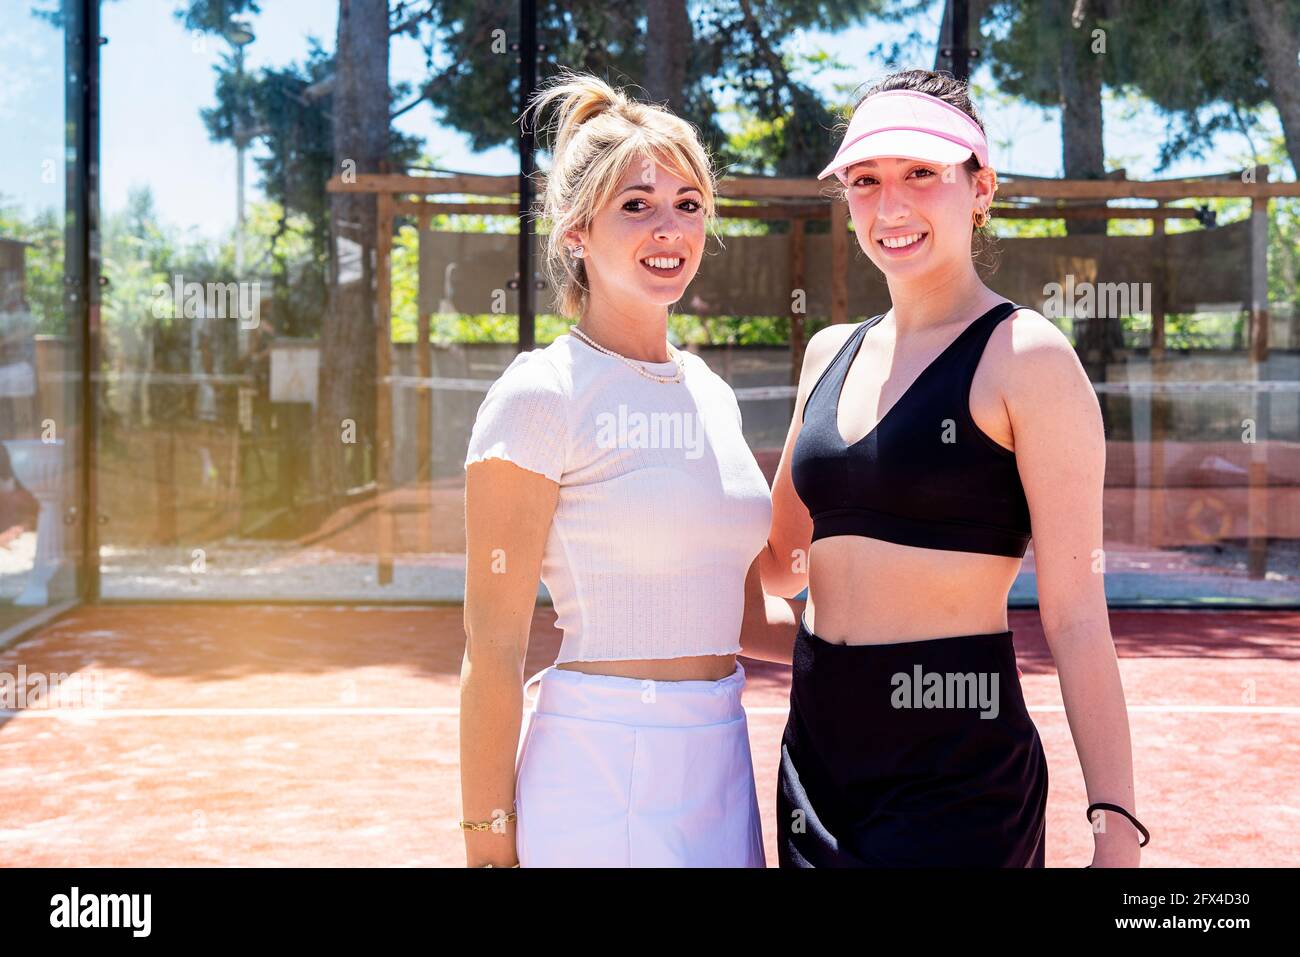 two smiling and winning girls pose for a photo on a tennis court Stock Photo